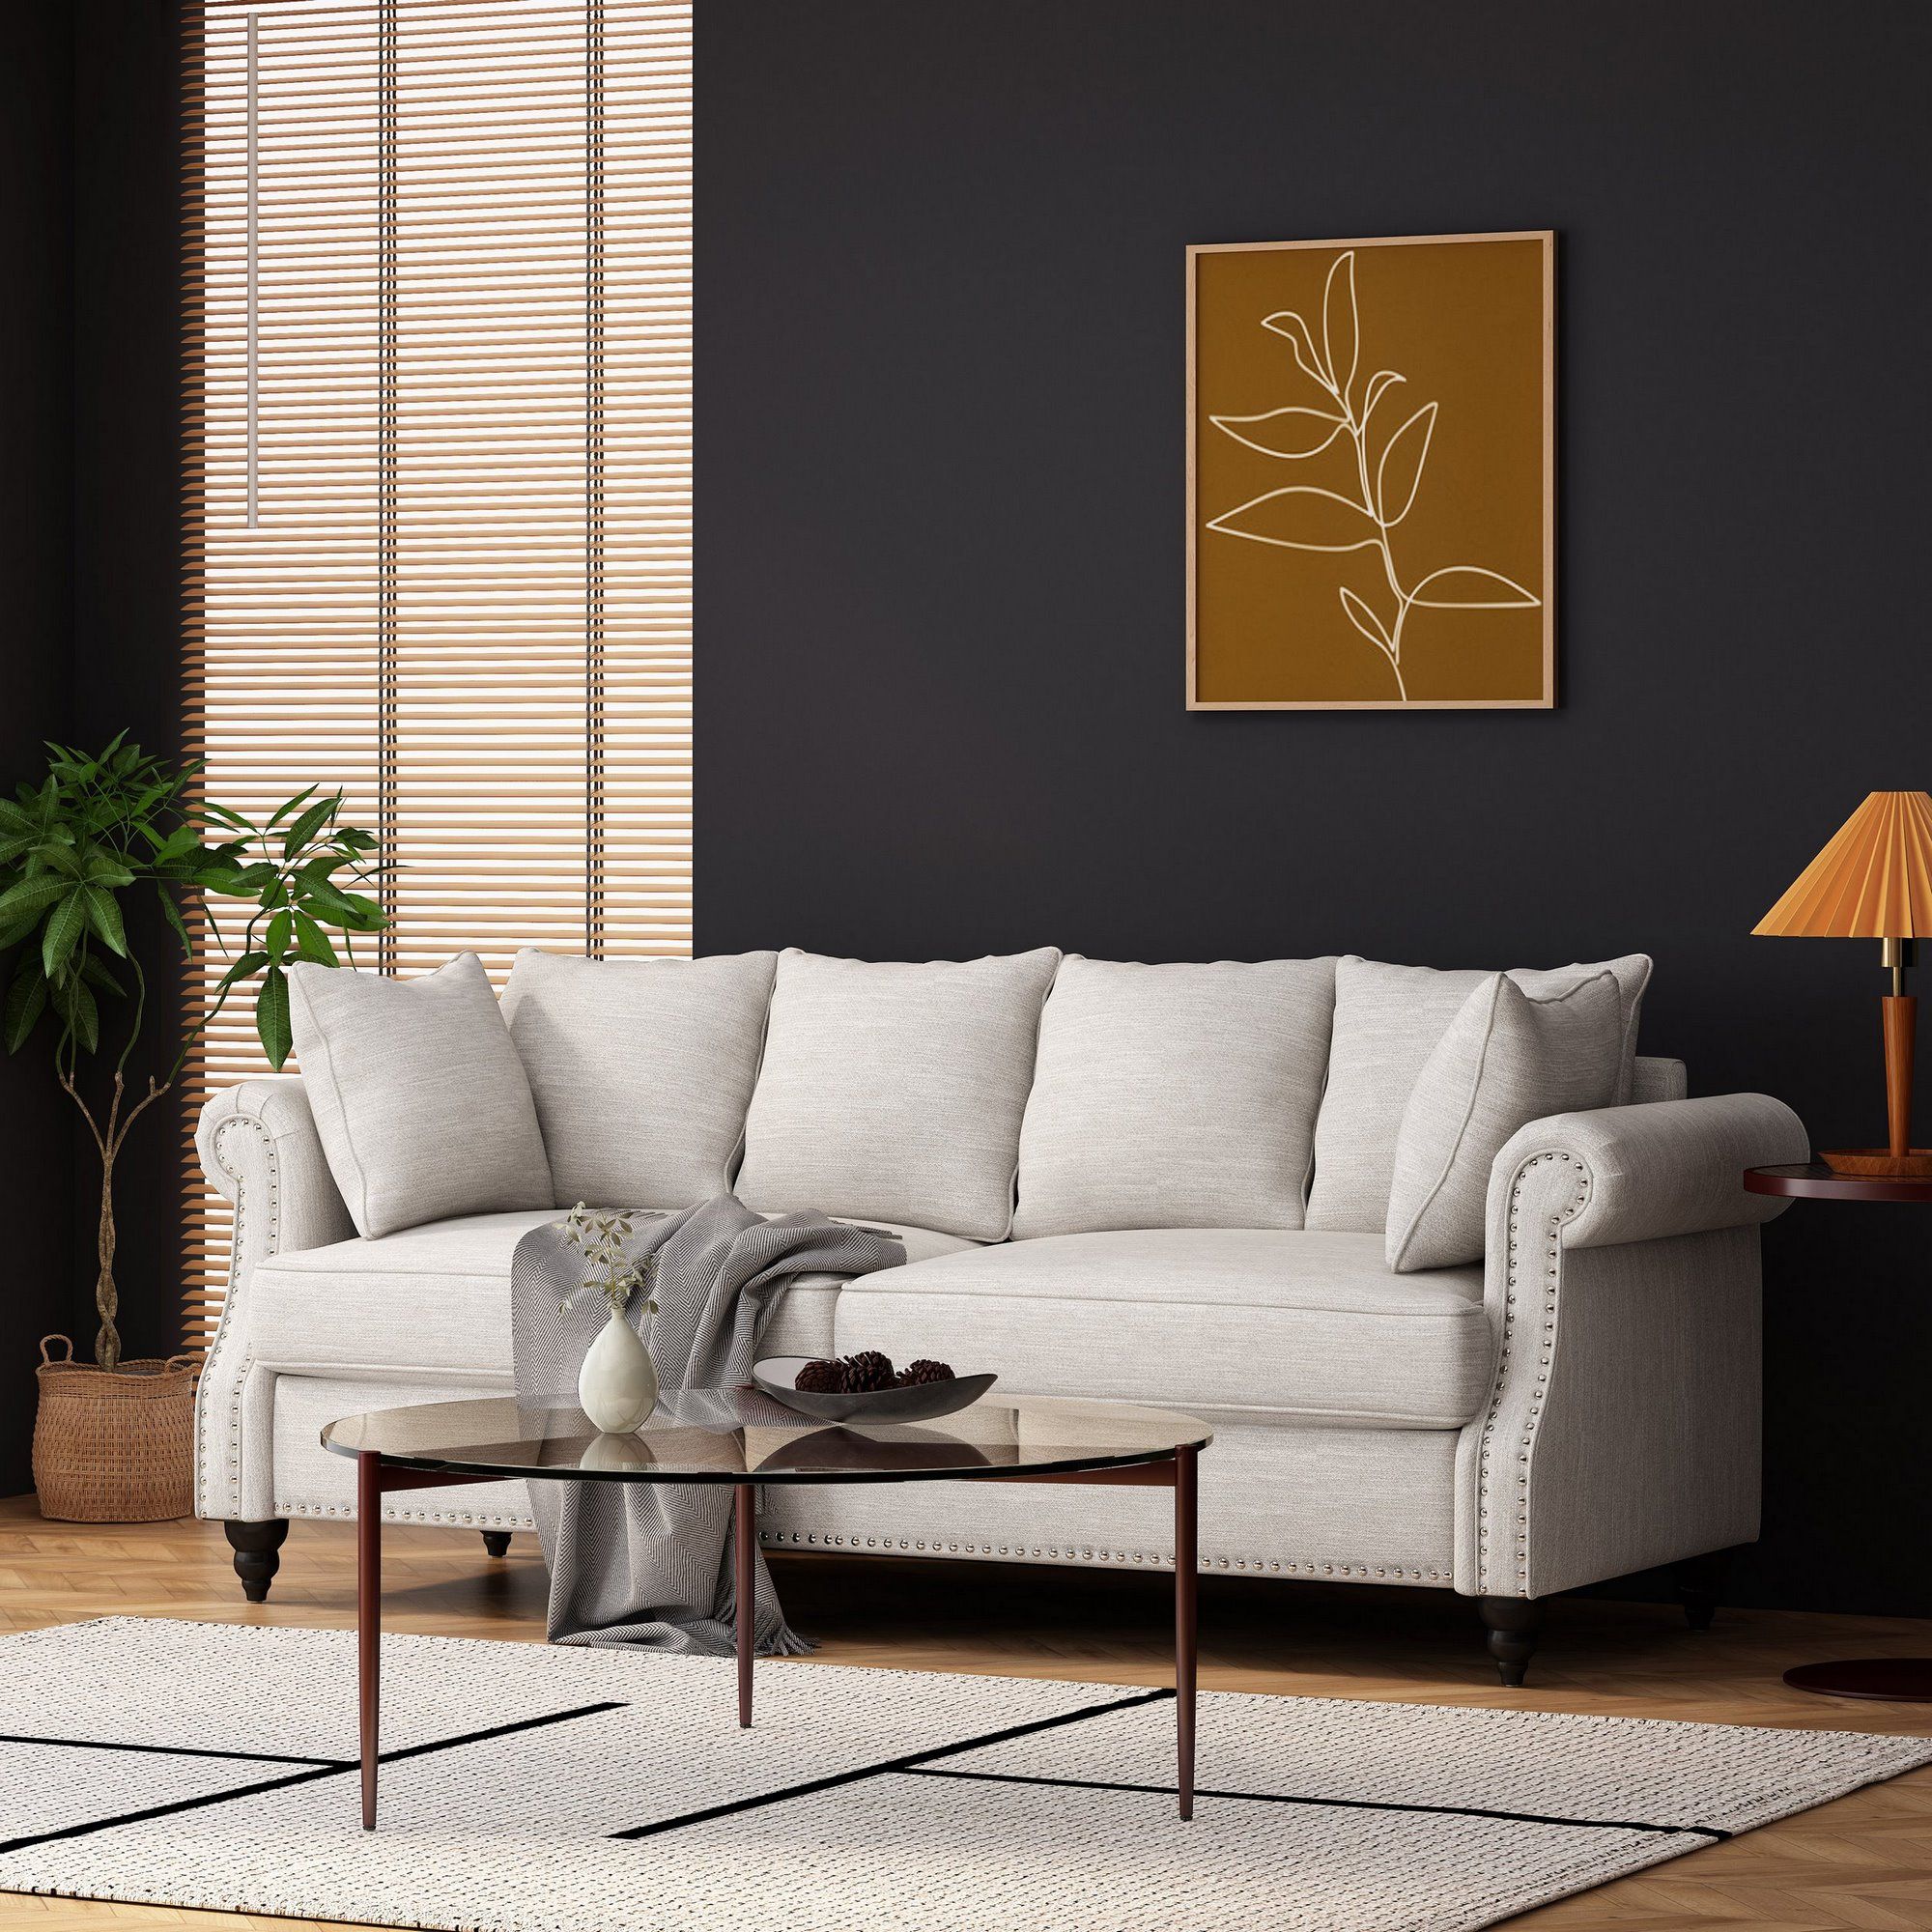 Manbow Contemporary Fabric Pillowback 3 Seater Sofa With Nailhead Trim,  Beige And Dark Brown Within Sofas With Pillowback Wood Bases (View 7 of 15)